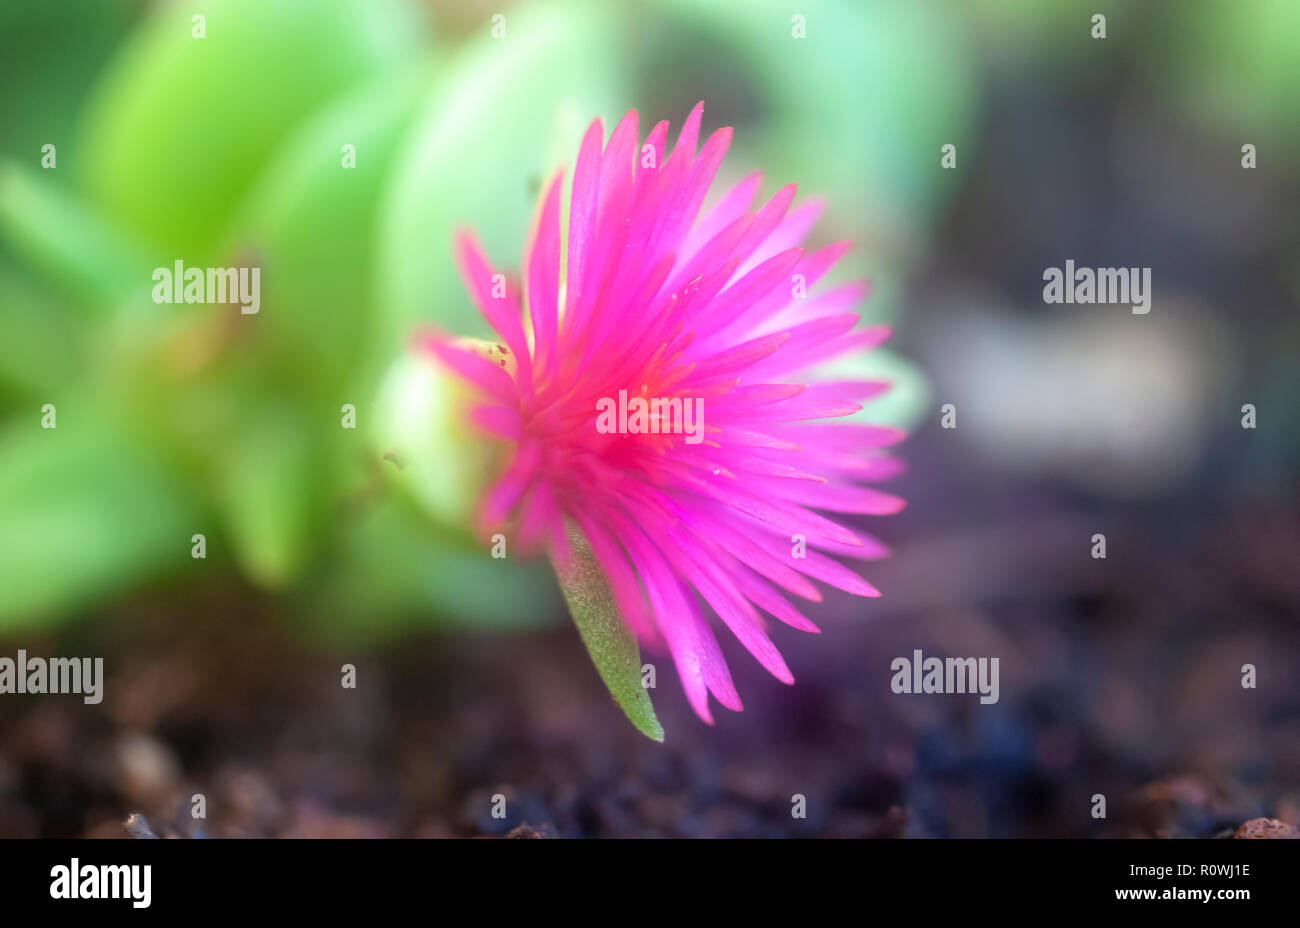 Close up of a pink flower on a succulent plant Stock Photo